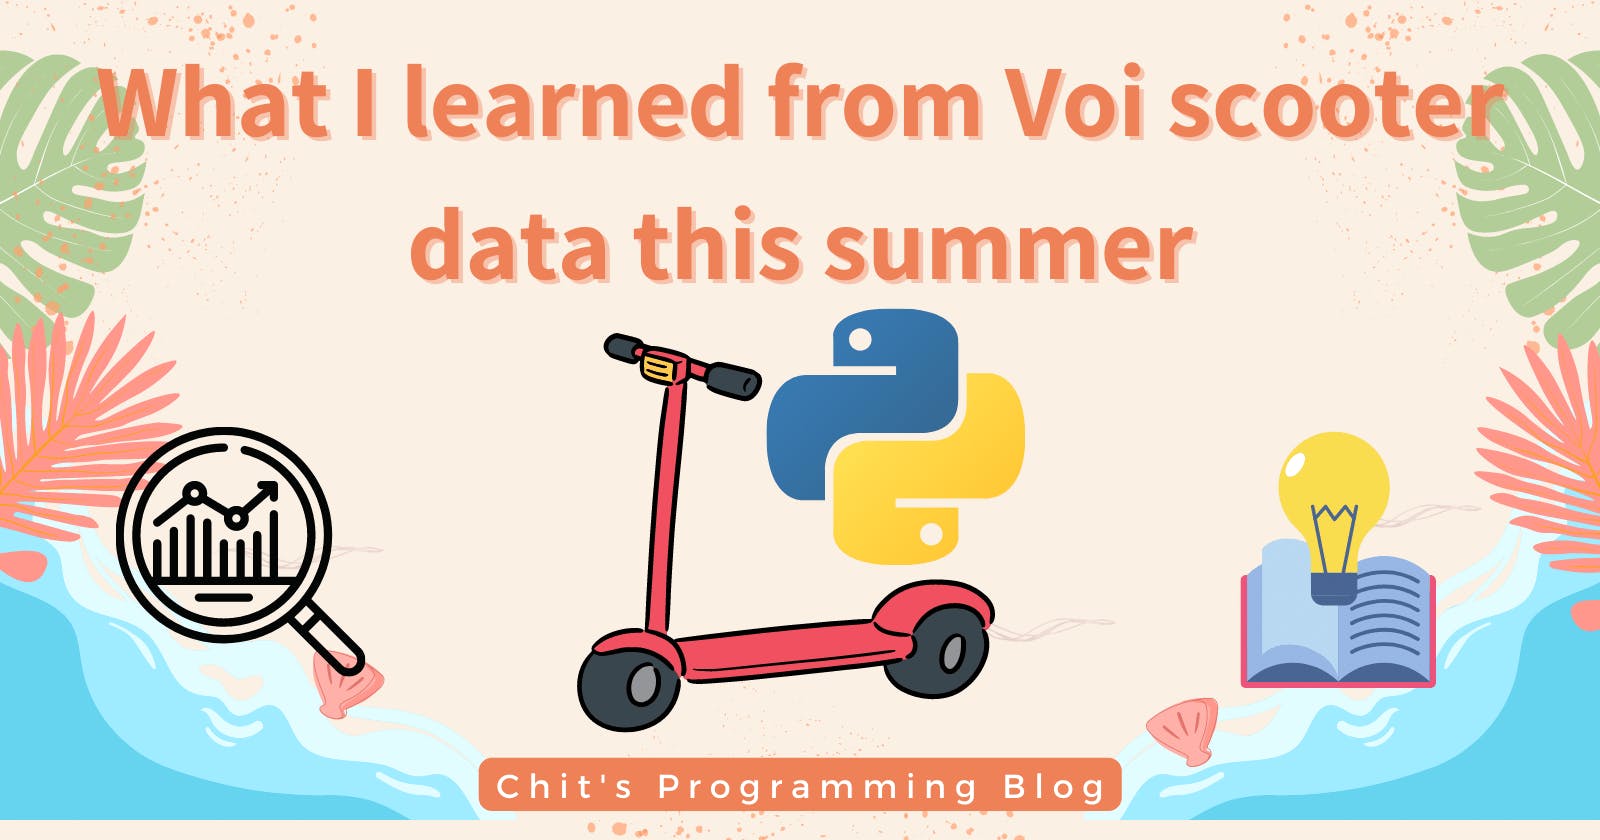 Where's my Voi scooter: [Conclusion] What I learned from Voi scooter data this summer